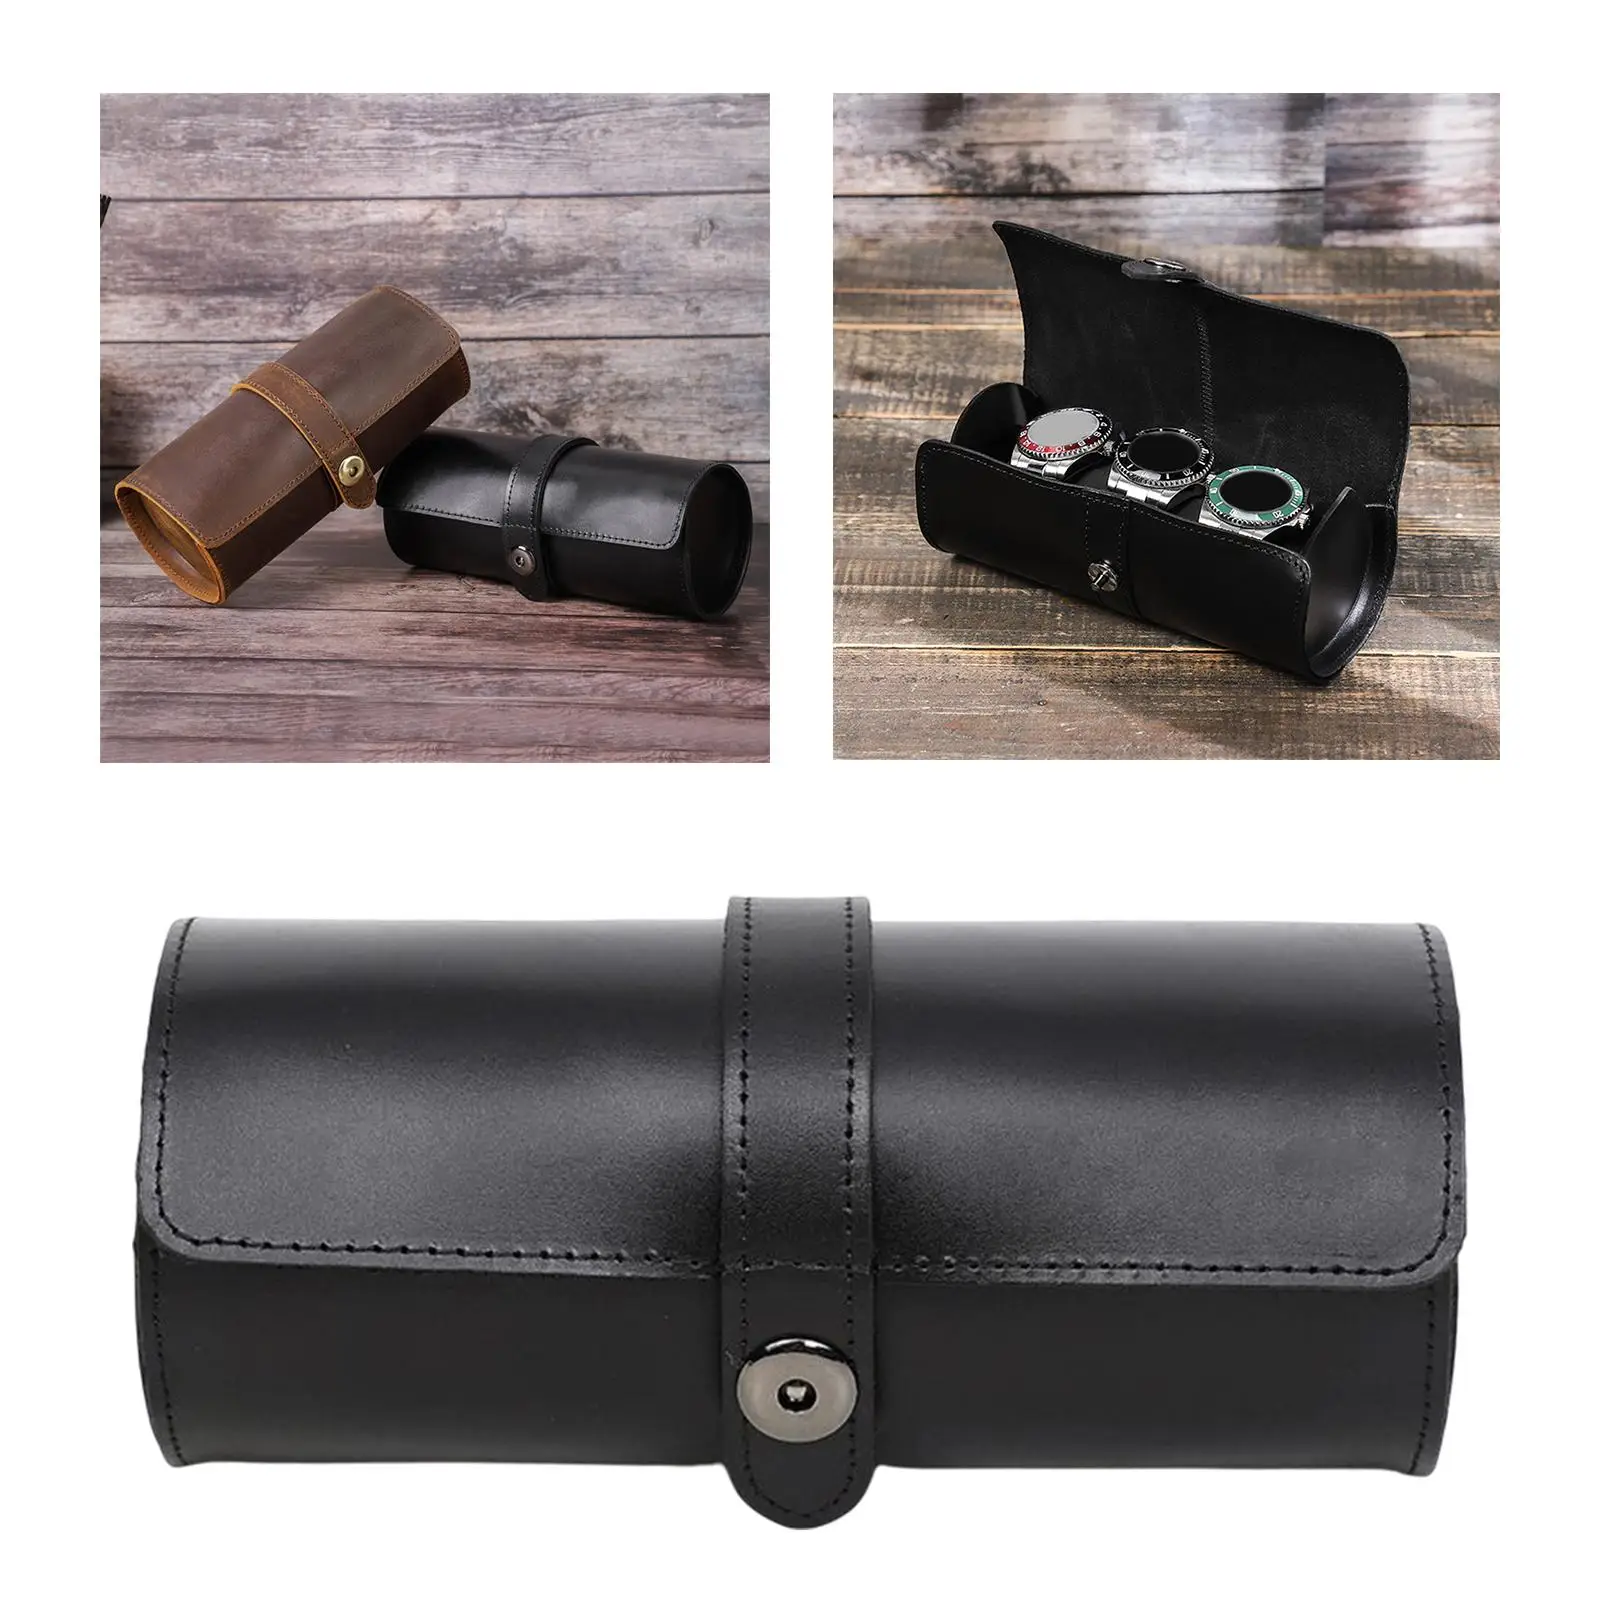 Watch Roll Travel Case PU Leather Jewelry Case Watch Holder Box Wrist Watch Container